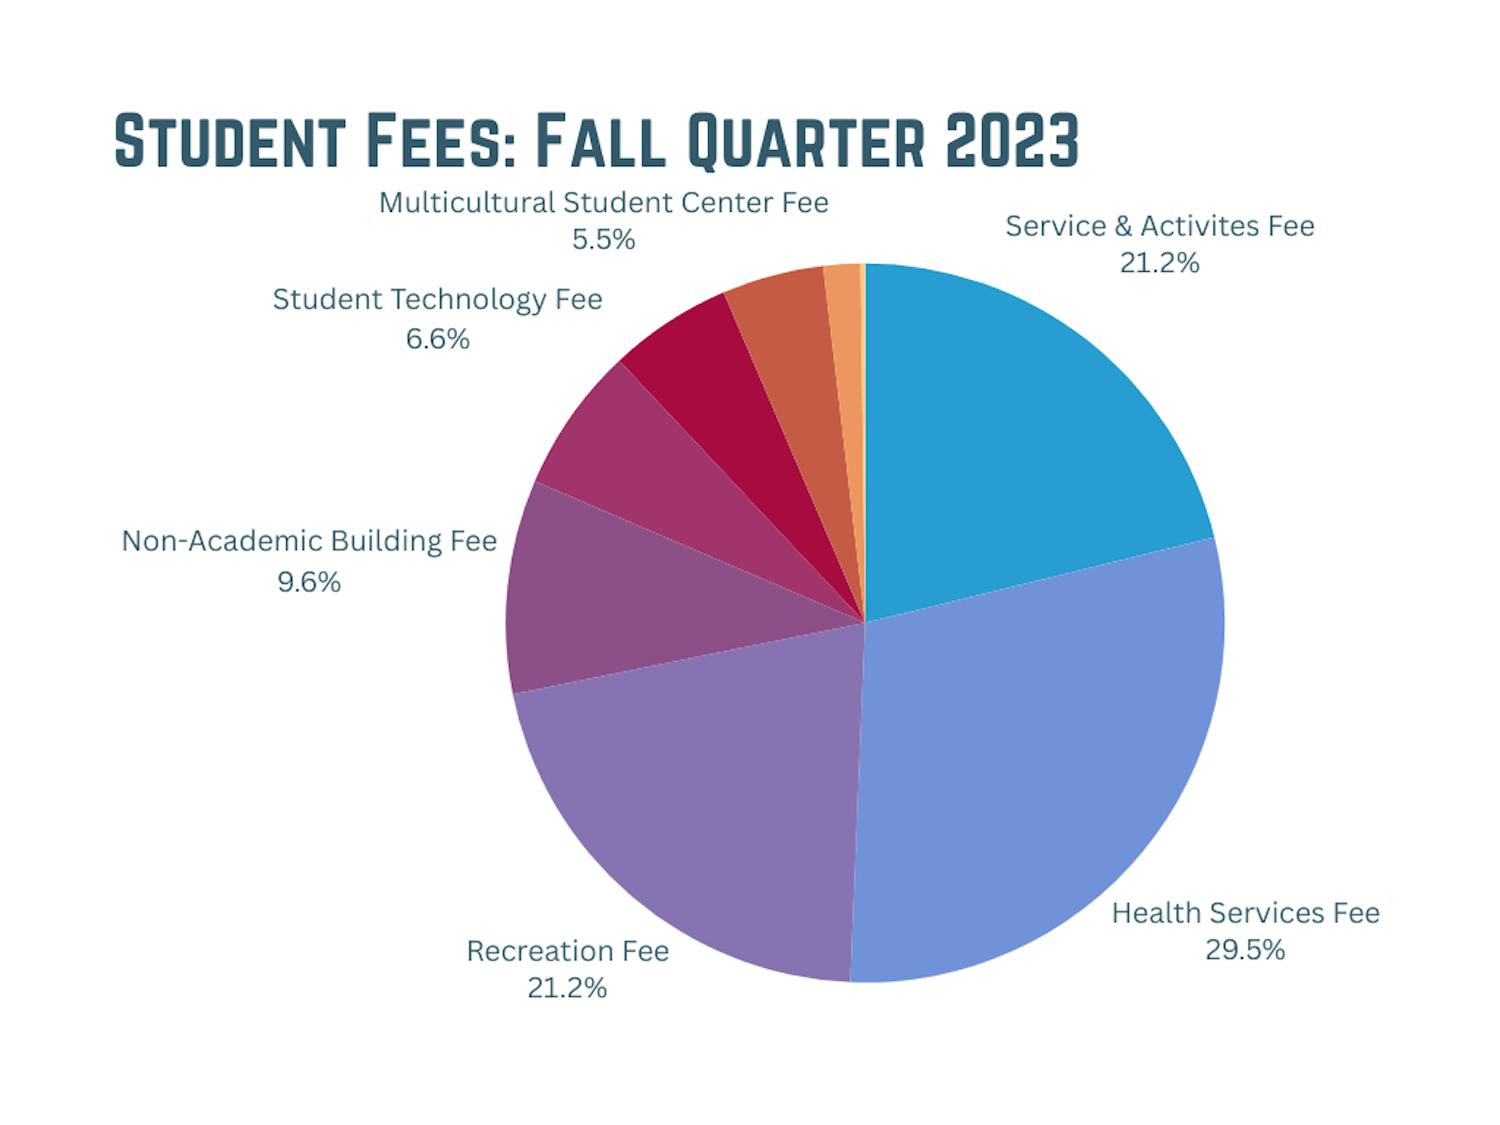 Students fees